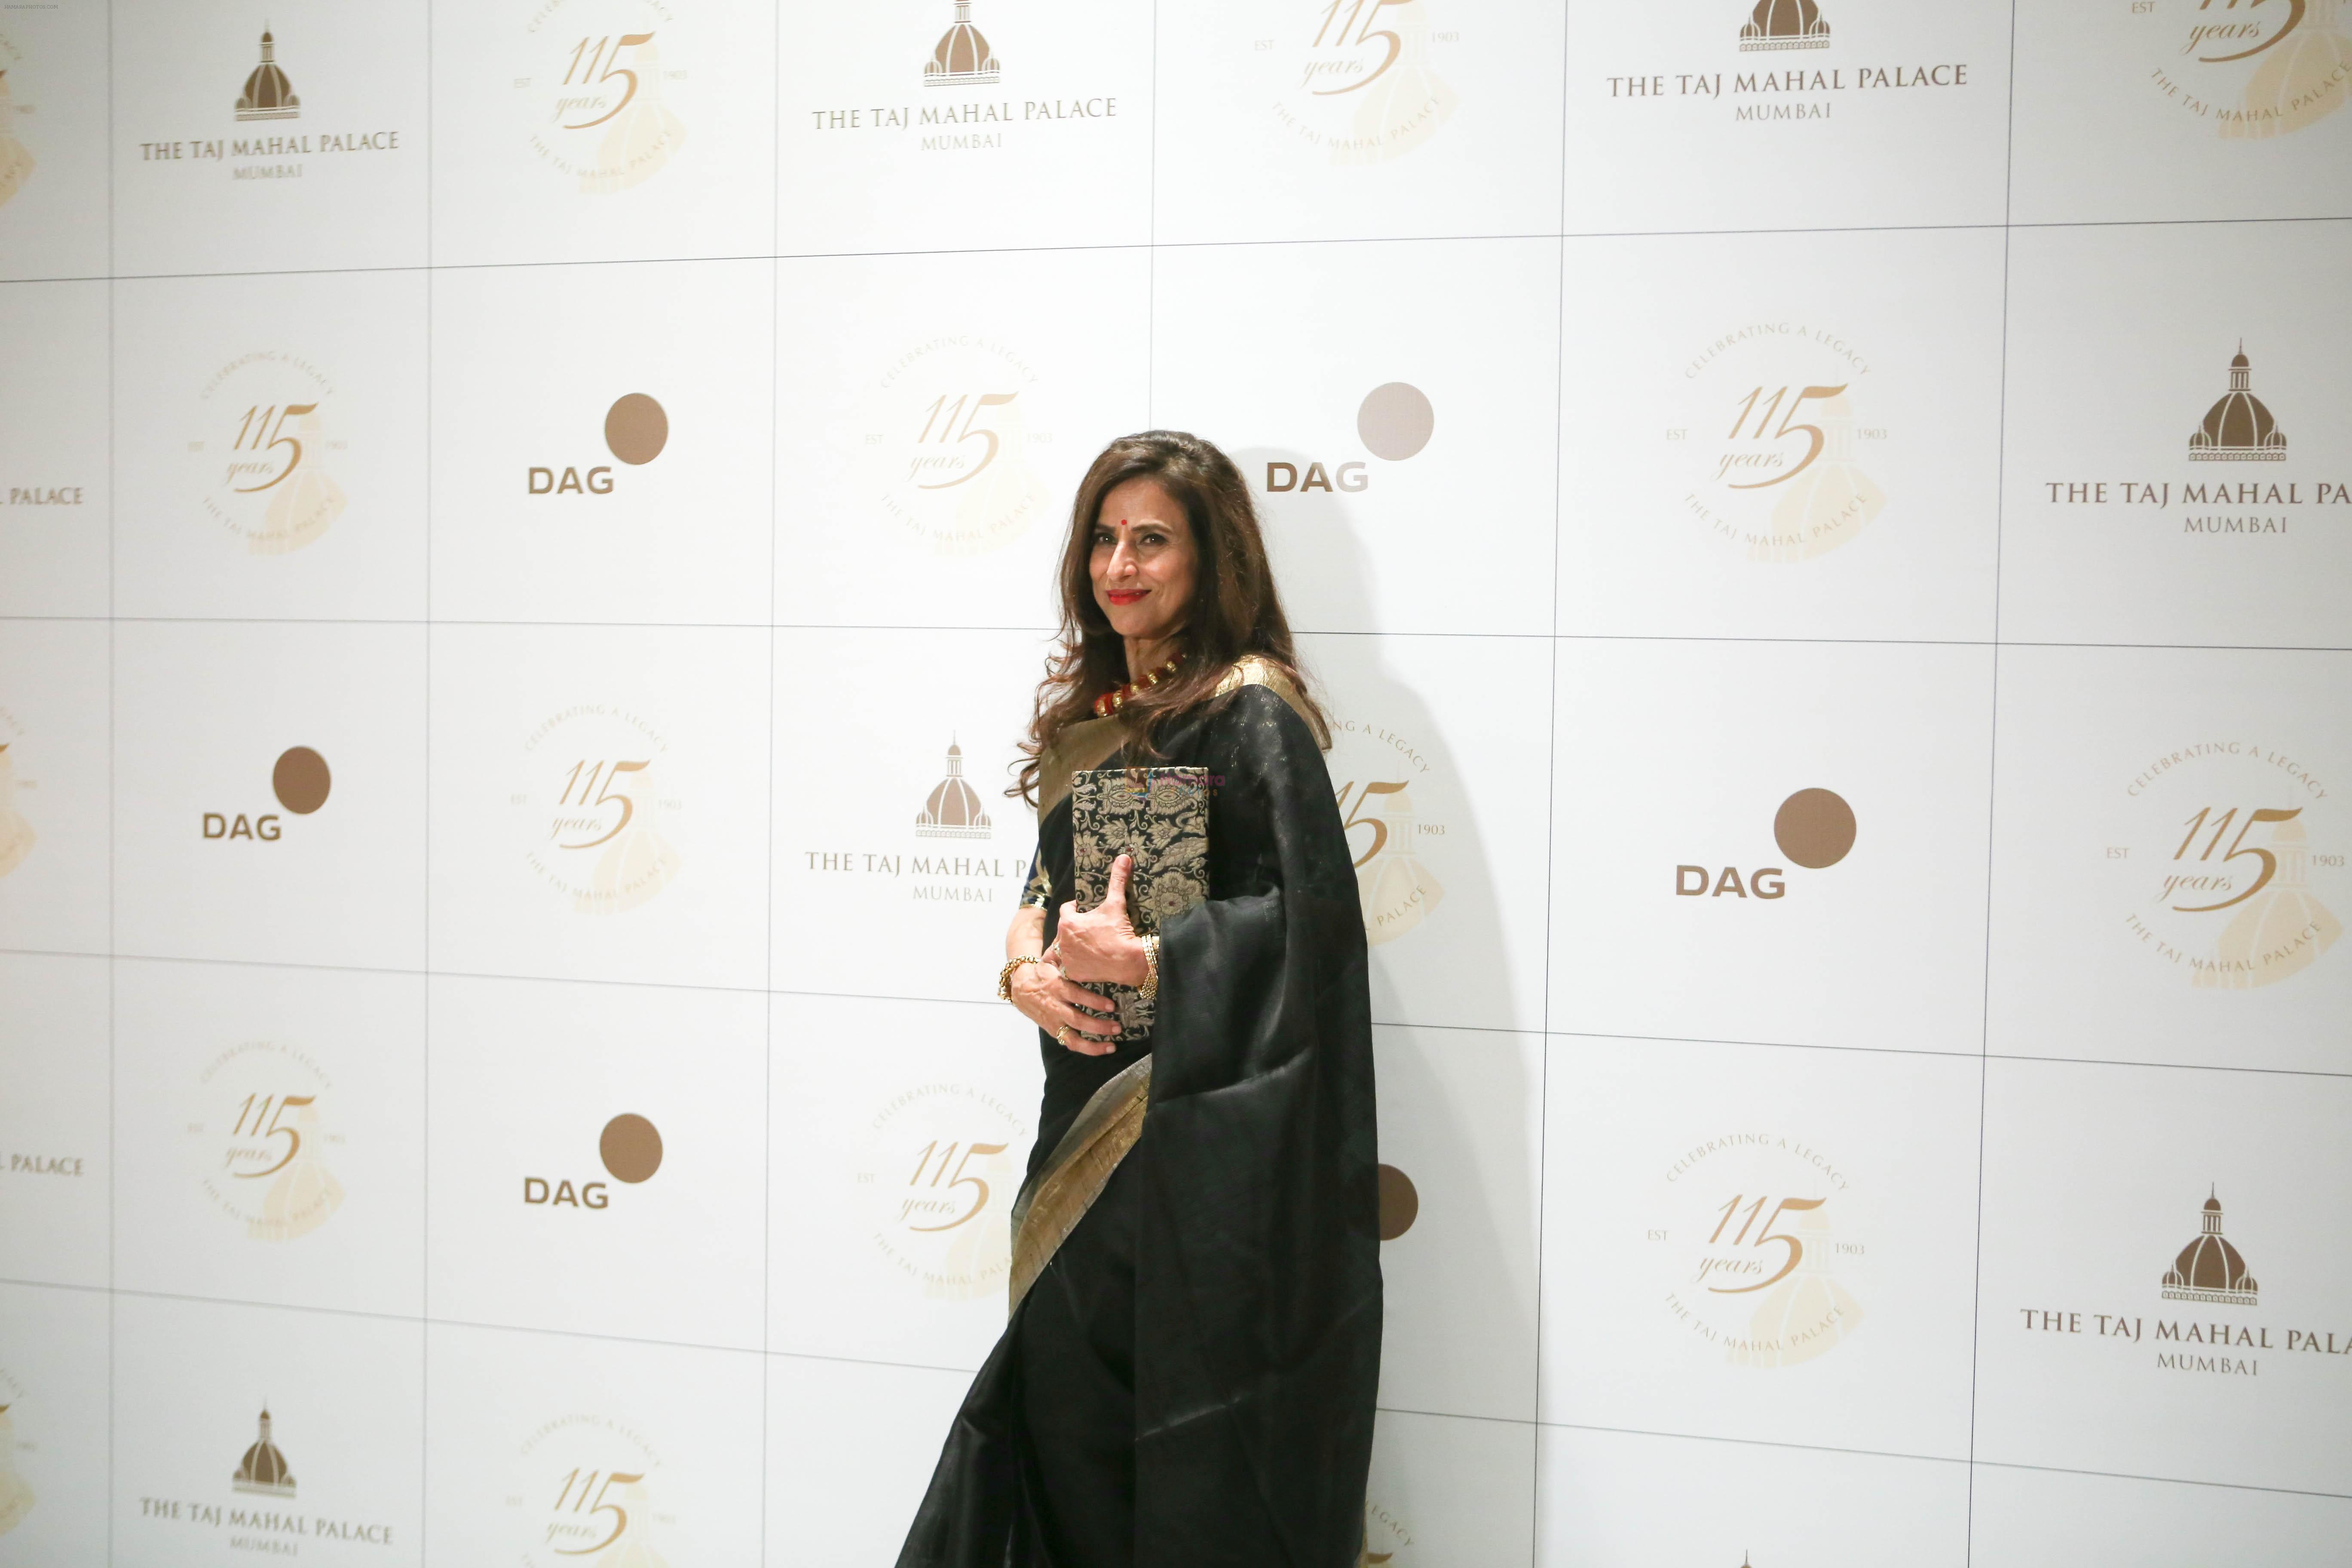 Shobhaa De attends the 115th anniversary celebration of Taj Mahal Palace which was celebrated with A Black Tie Charity Ball in mumbai on 15th Dec 2018